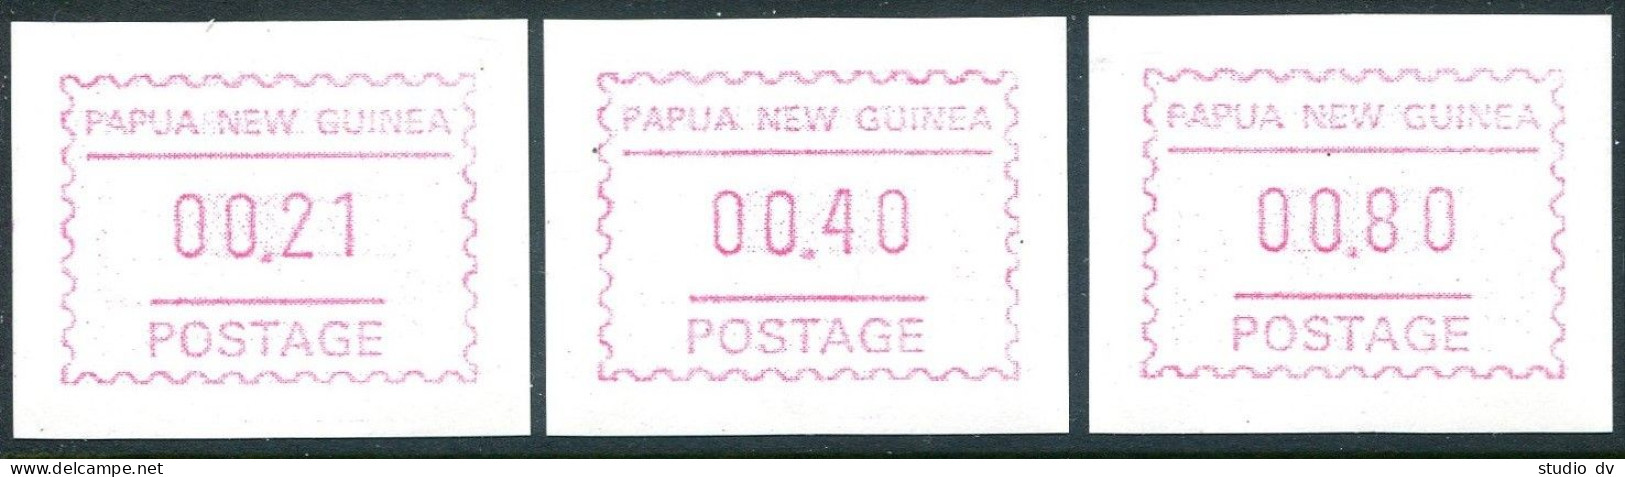 Papua New Guinea Automatic Stamps 1991 Year POSTAGE, MNH. Michel Auto 2. - Guinea (1958-...)